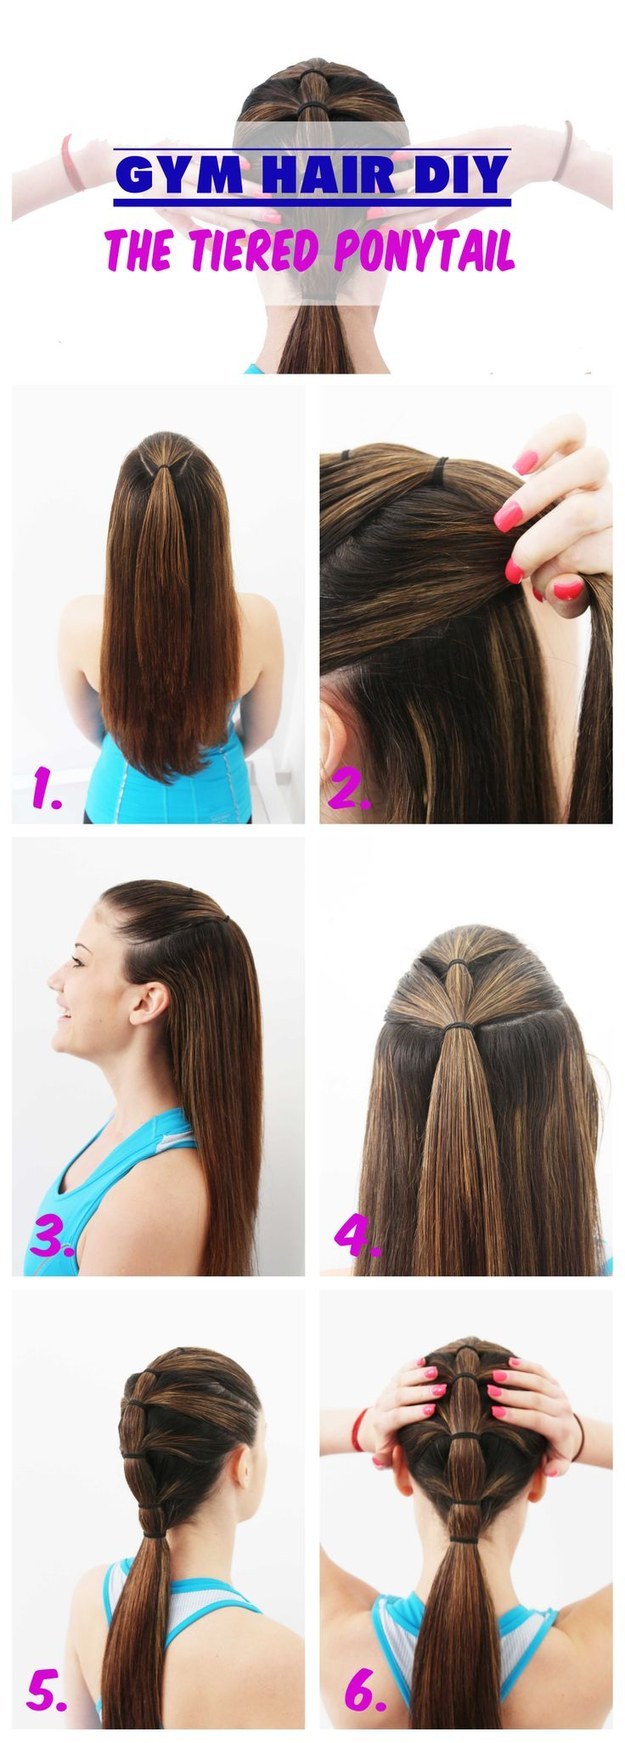 19b. A tiered ponytail will keep everything in its rightful place.